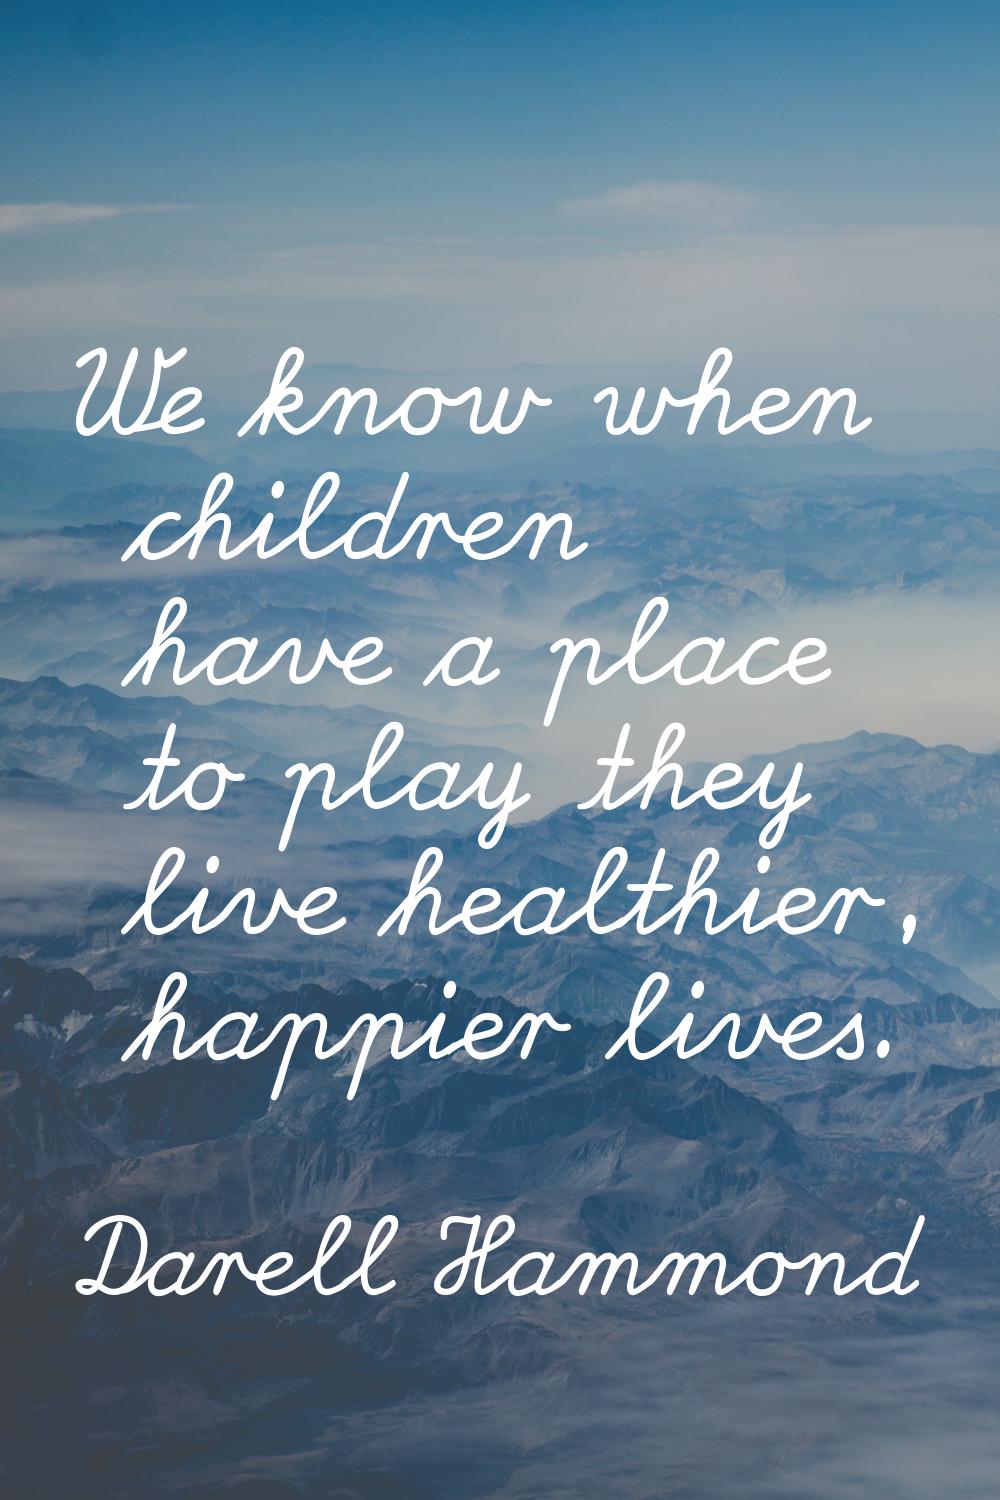 We know when children have a place to play they live healthier, happier lives.